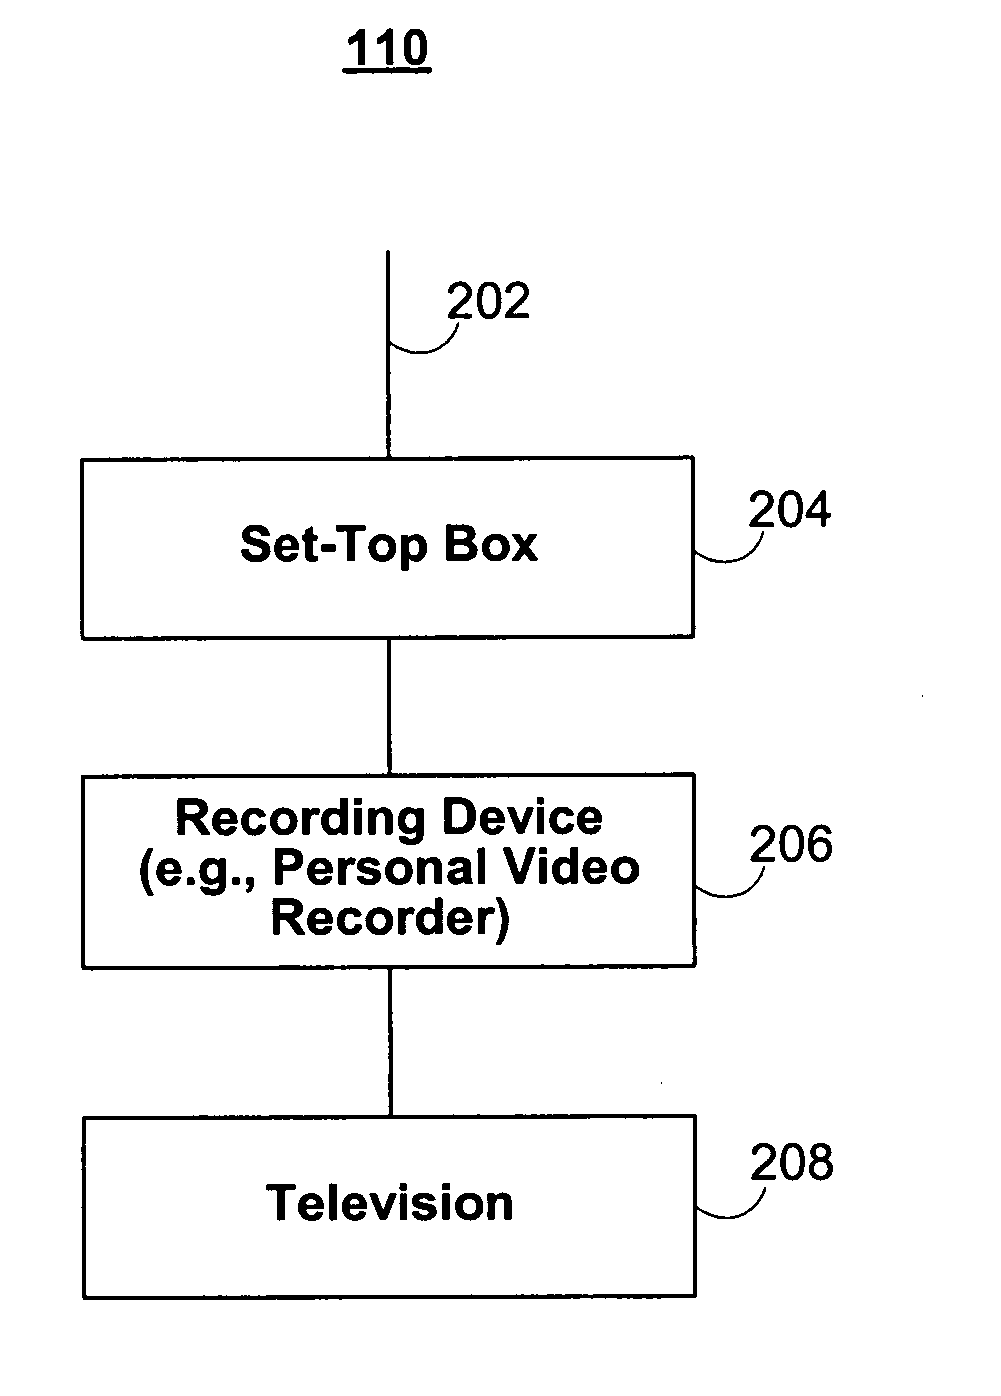 Systems and methods for episode tracking in an interactive media environment